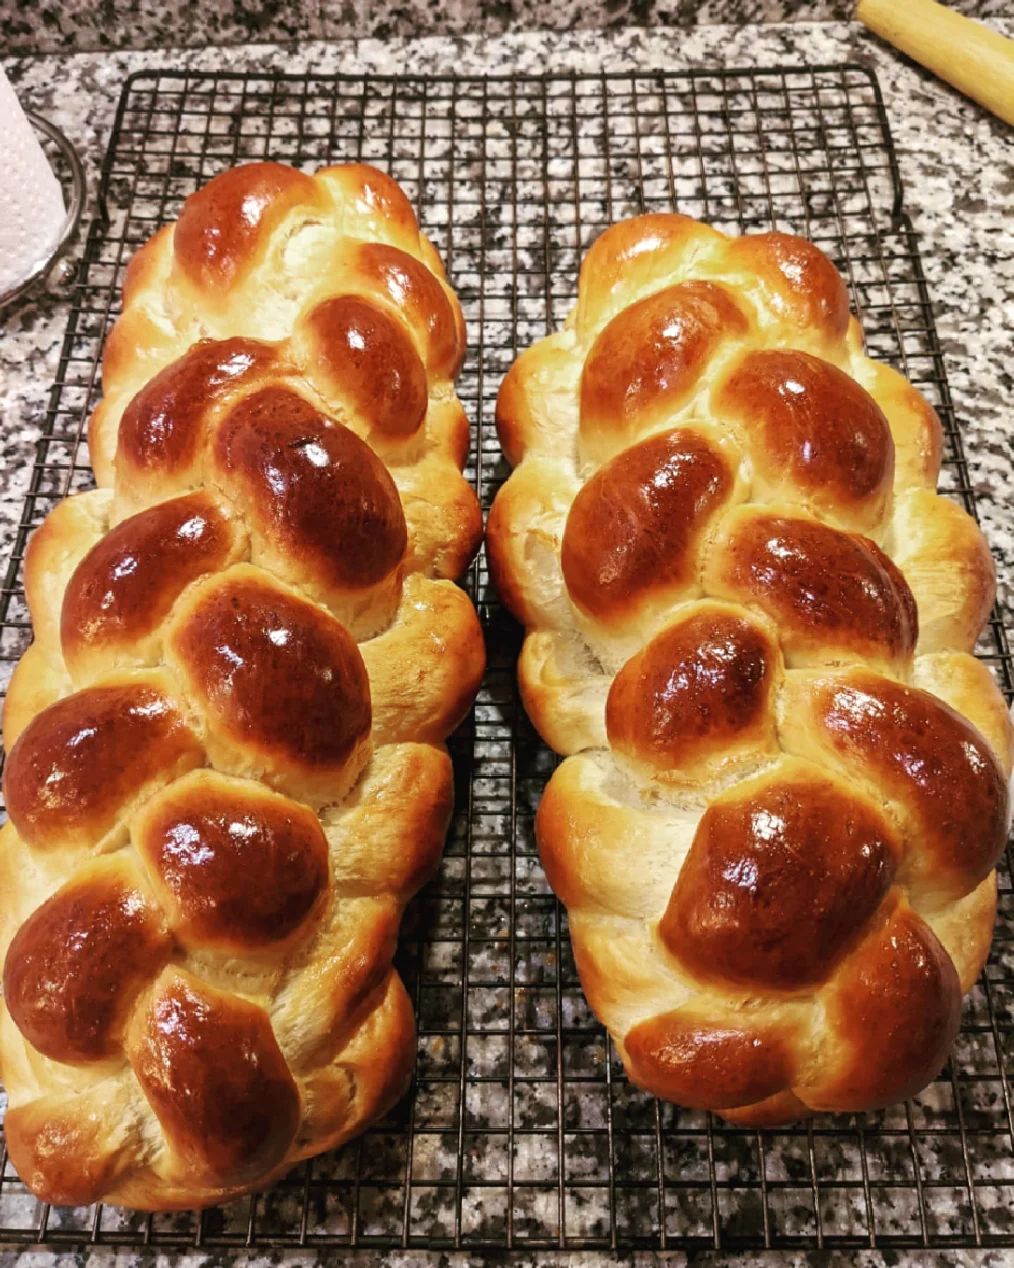 Two freshly baked loaves of challah bread.